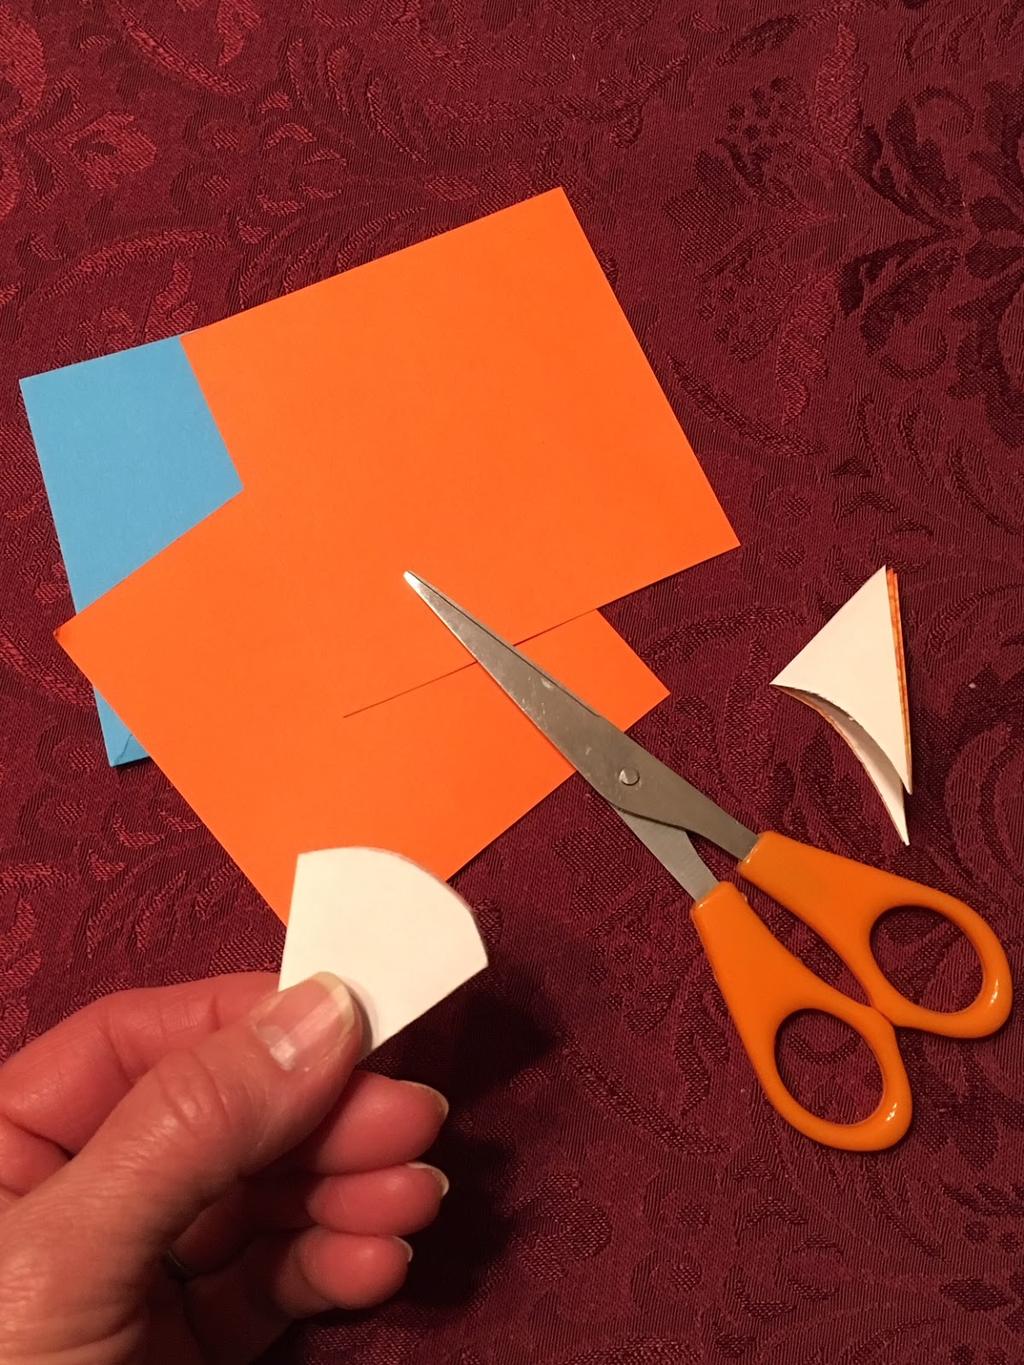 Unfold the paper to reveal an 8-pointed ower!